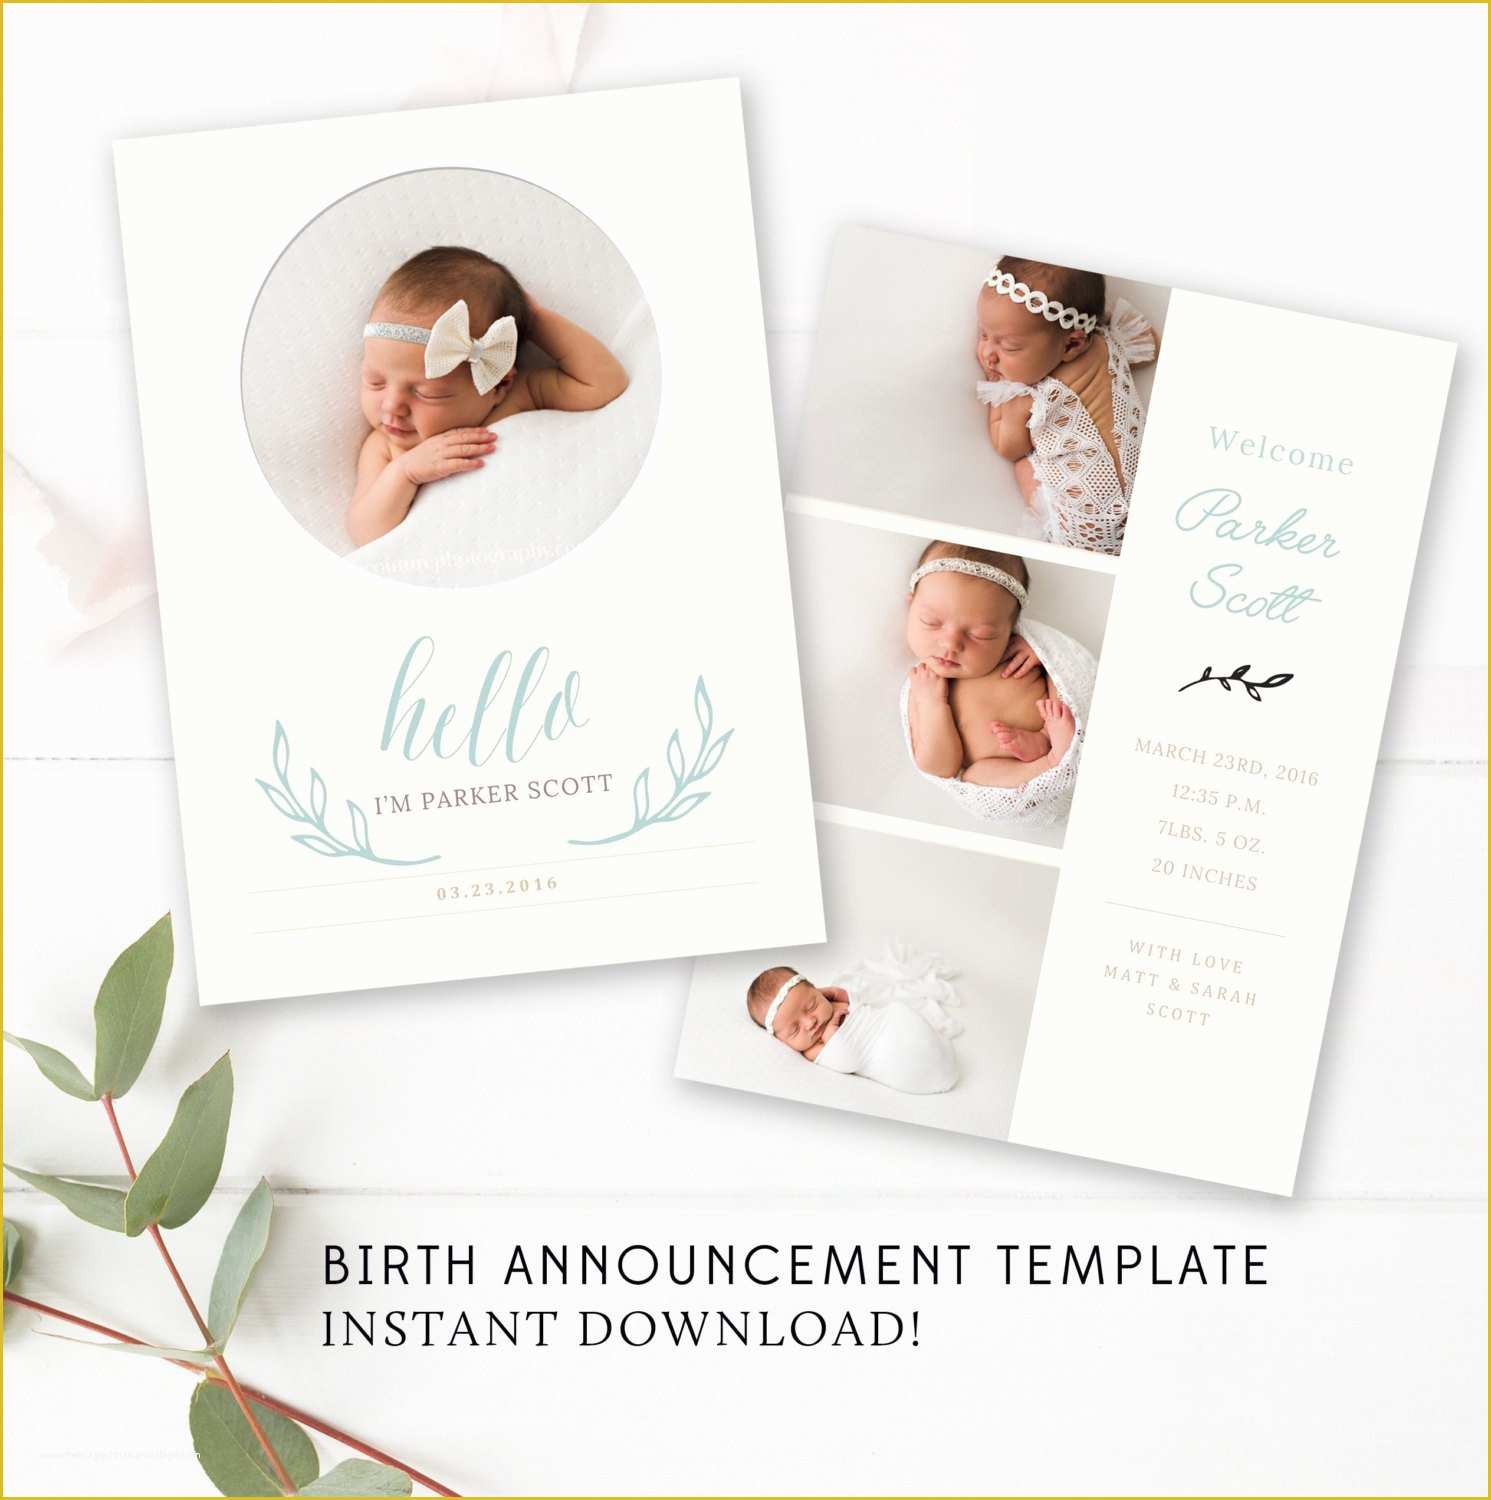 Baby Announcement Cards Free Template Of Baby Birth Announcement Template 5x7 Card Newborn